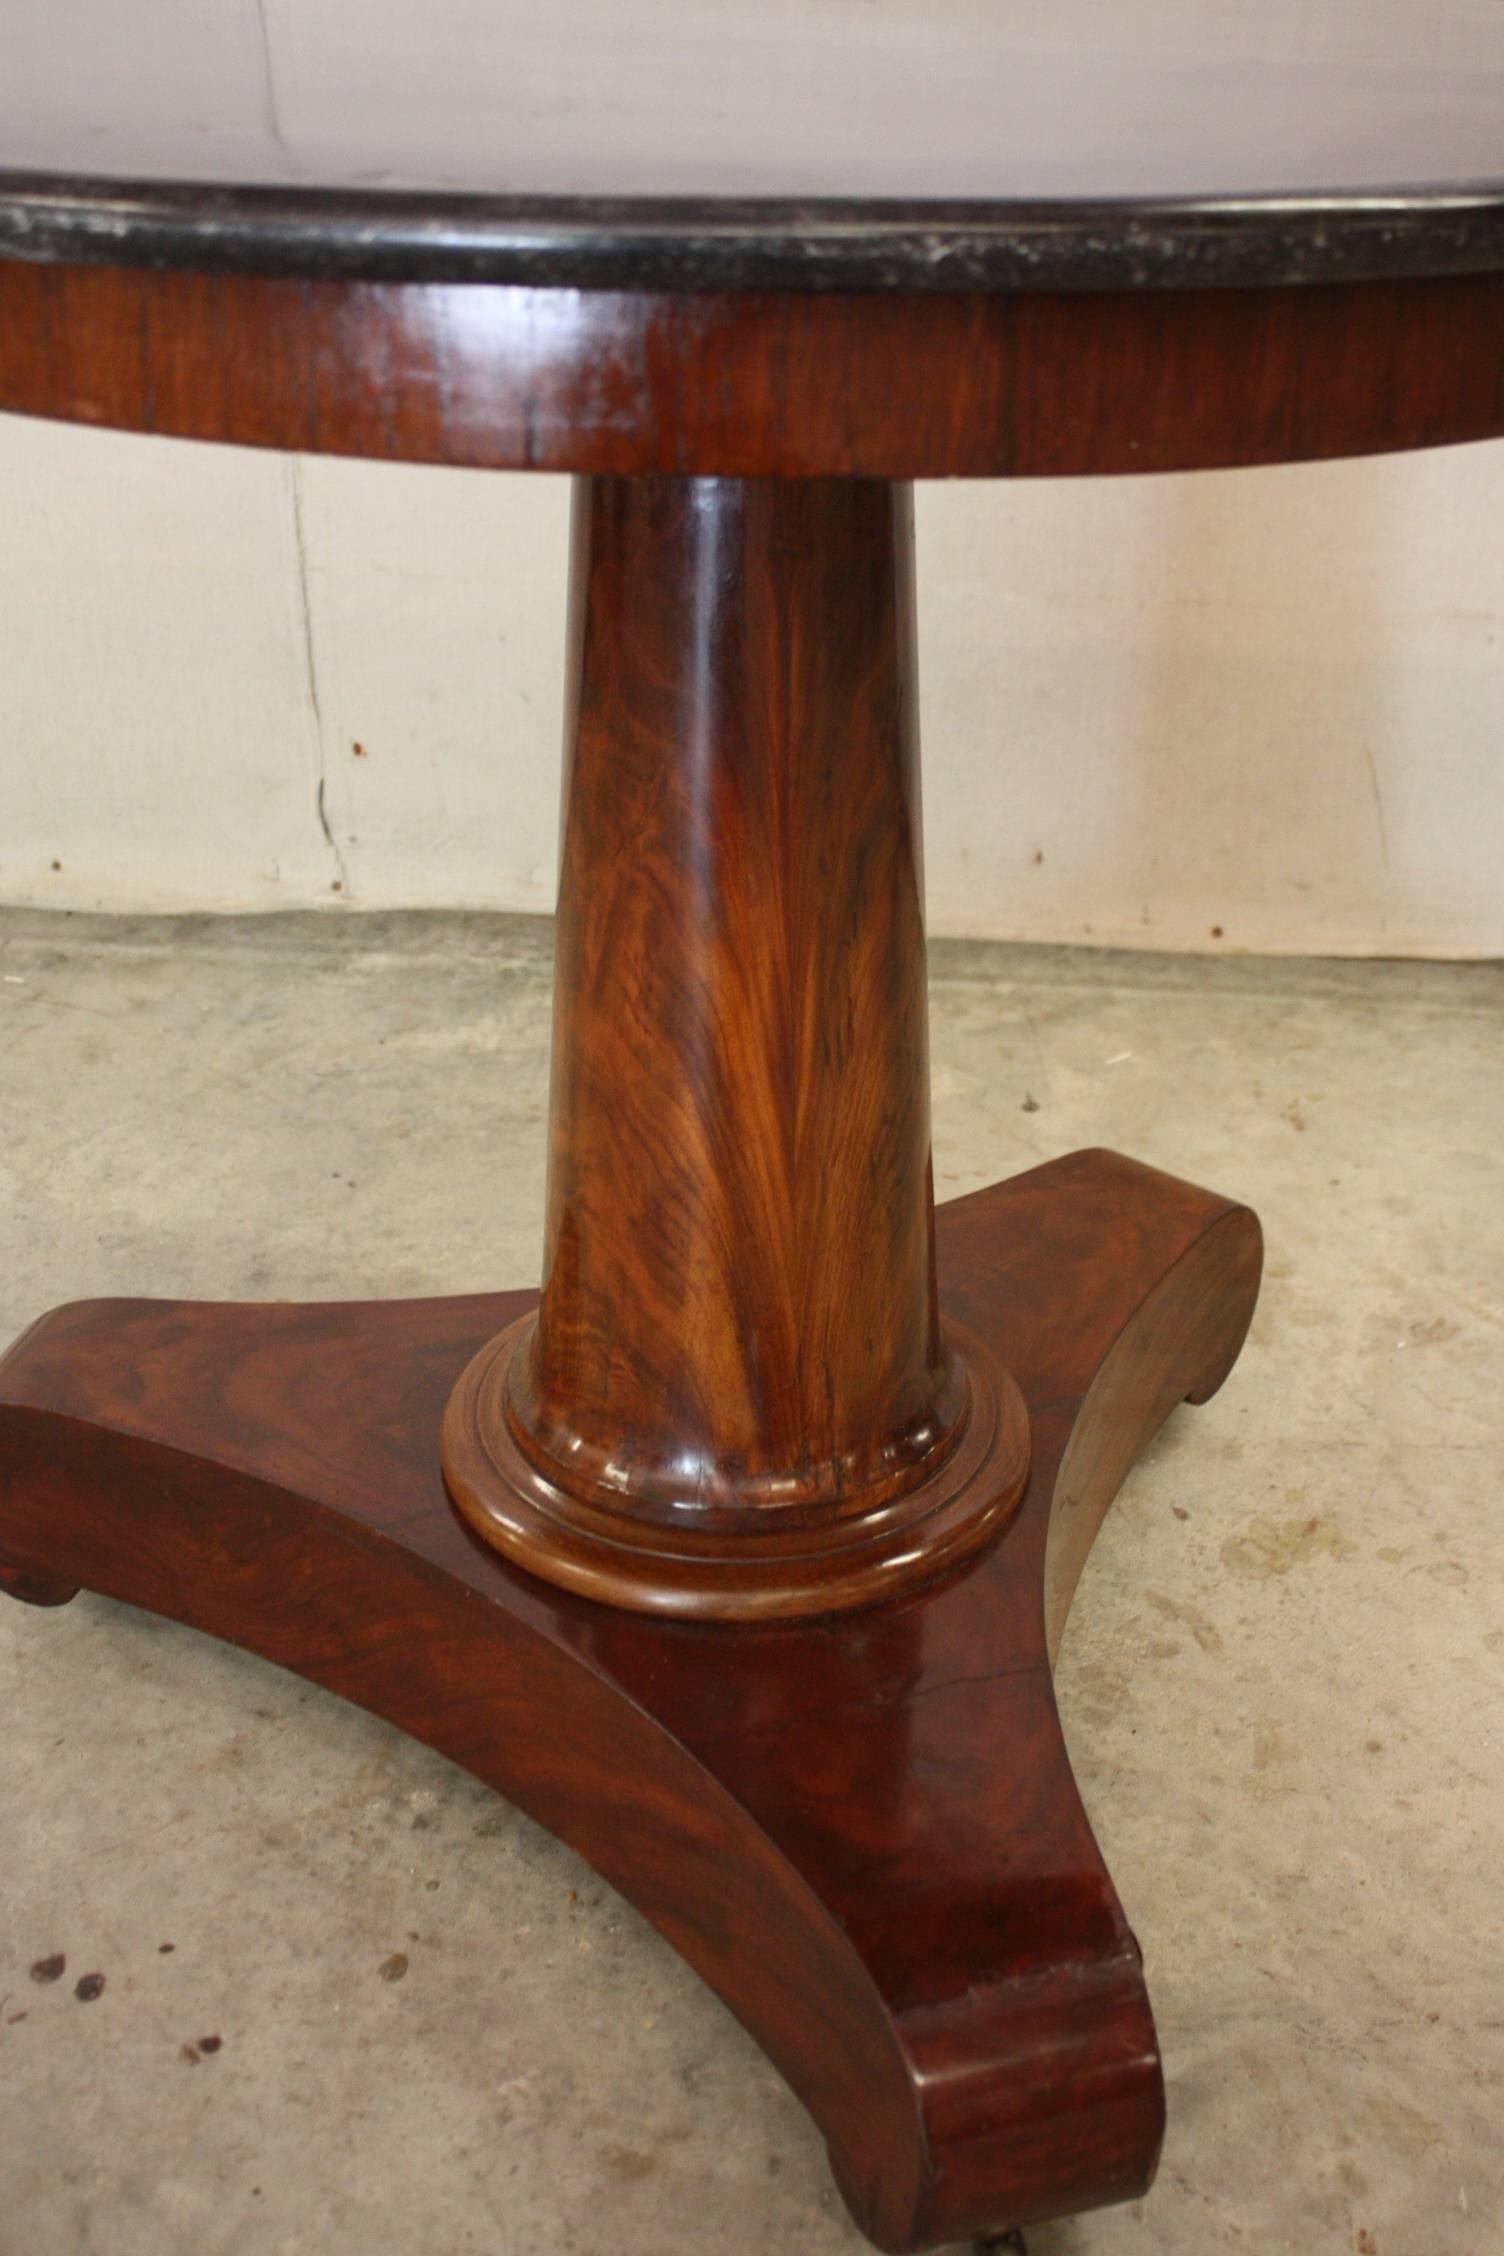 A French Empire style small pedestal table or gueridon made of red mahogany with a decorative brass casters and topped with a round black marble. Quite a lovely table with lots of character. Perfect for a side table or even a centre table.